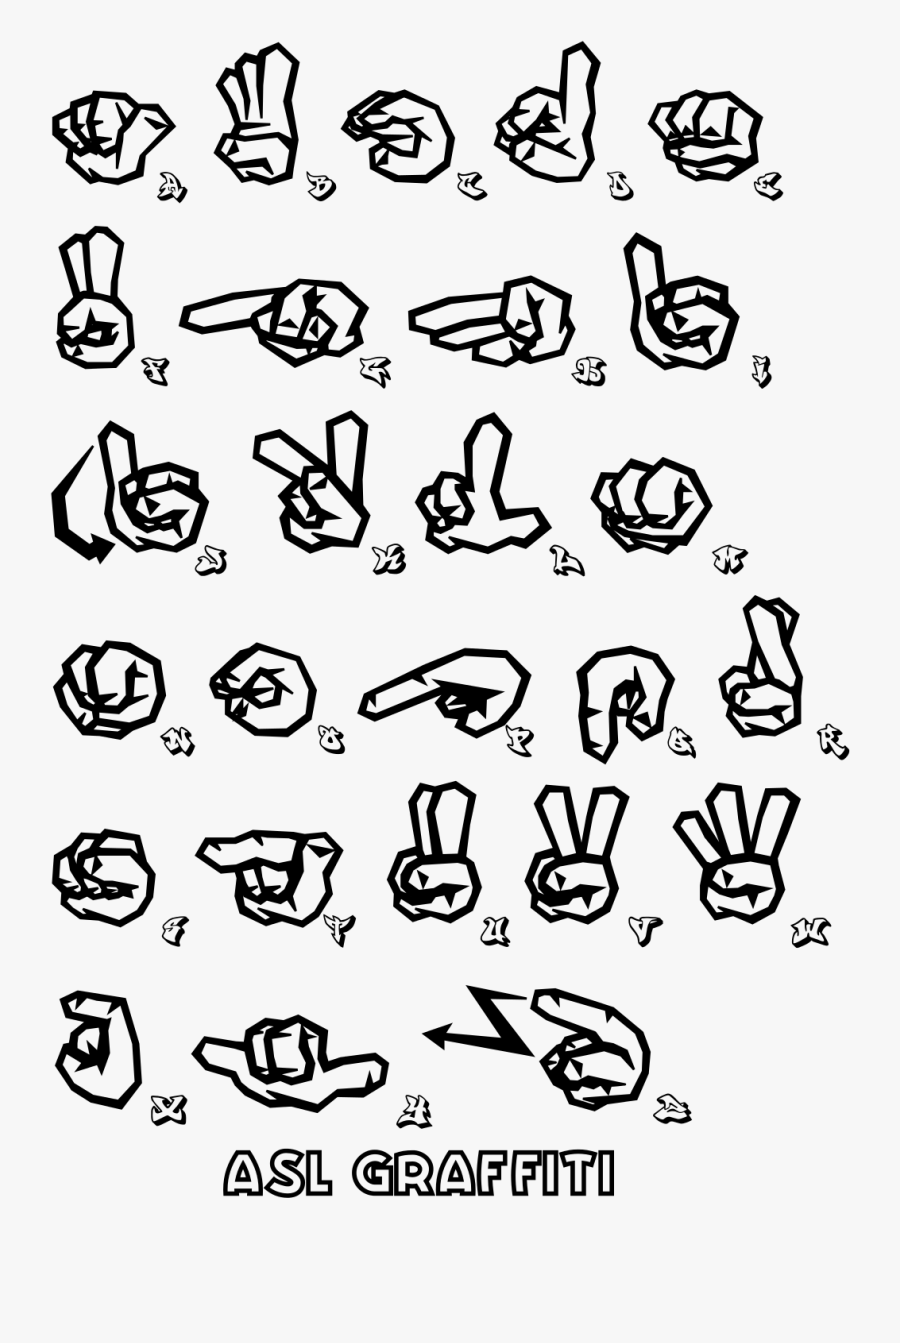 I Love You Hand American Sign Language Coloring Pages Easy Beginner Graffiti Art Free Transparent Clipart Clipartkey